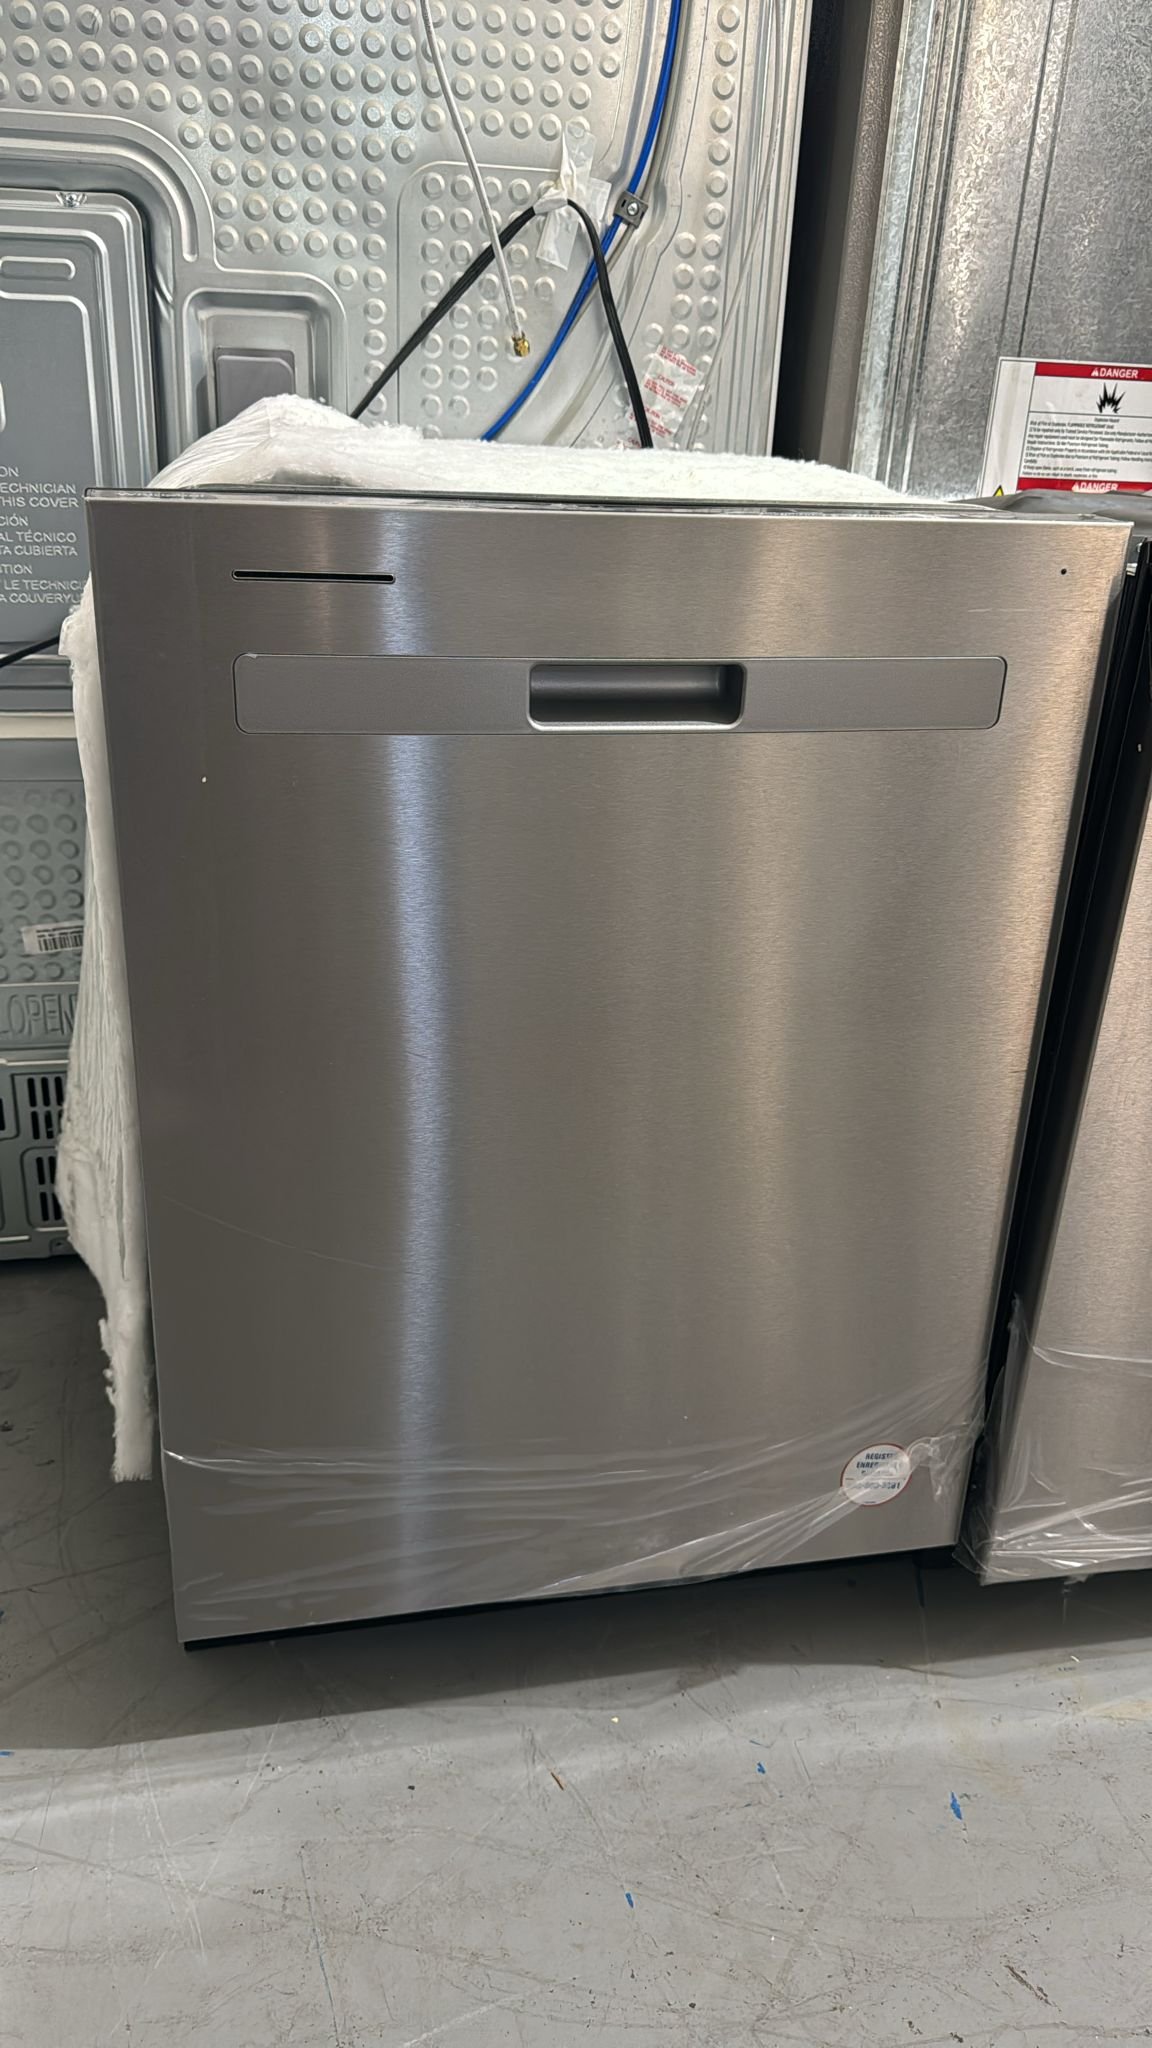 Whirlpool Scratch And Dent Dishwasher – Stainless